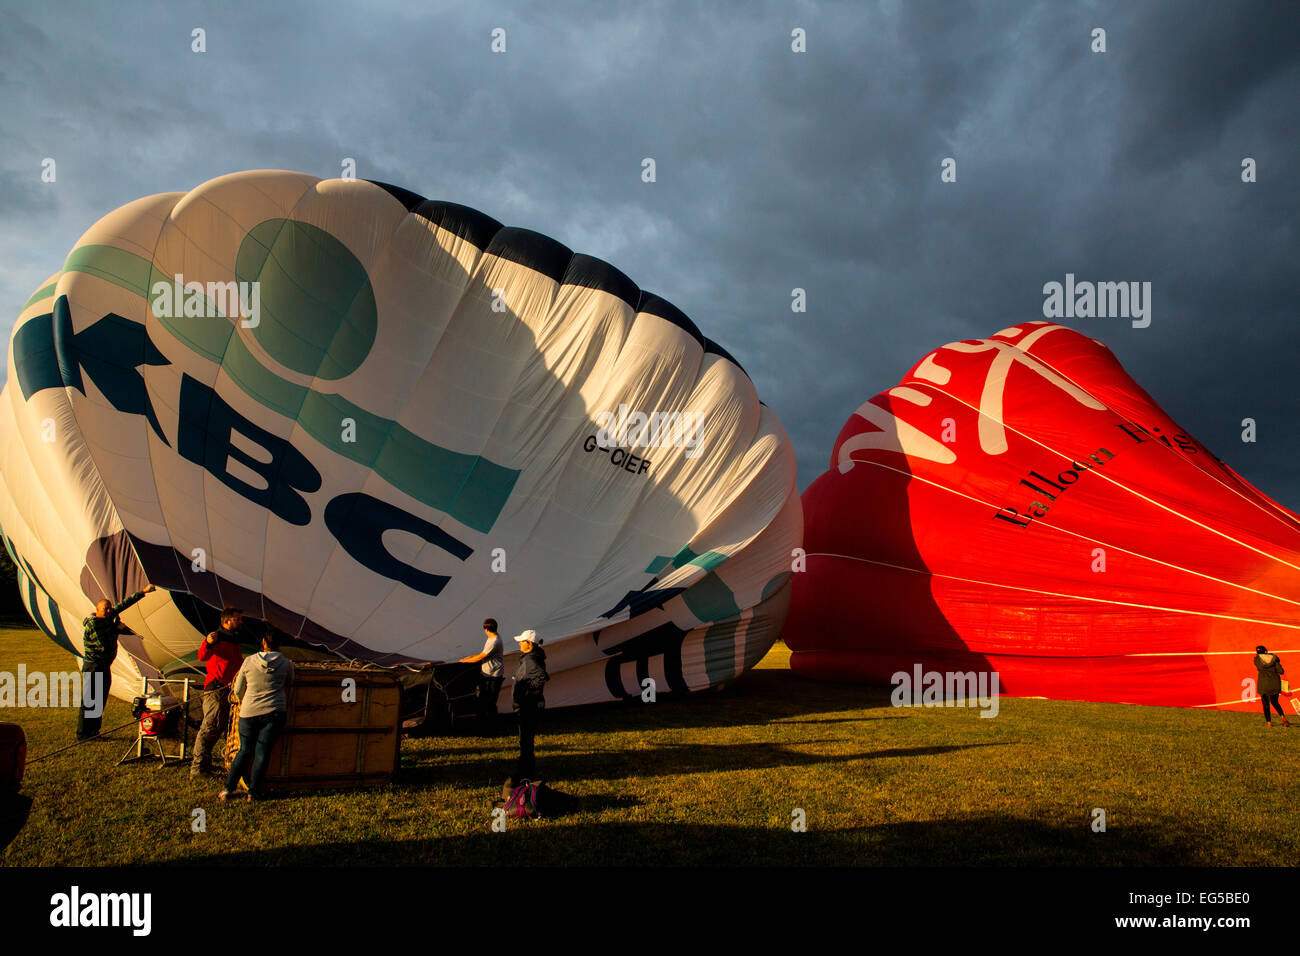 Teamwork preparation for tethered hot air balloons against dramatic sky, South Oxfordshire, EnglandHot air balloon Stock Photo